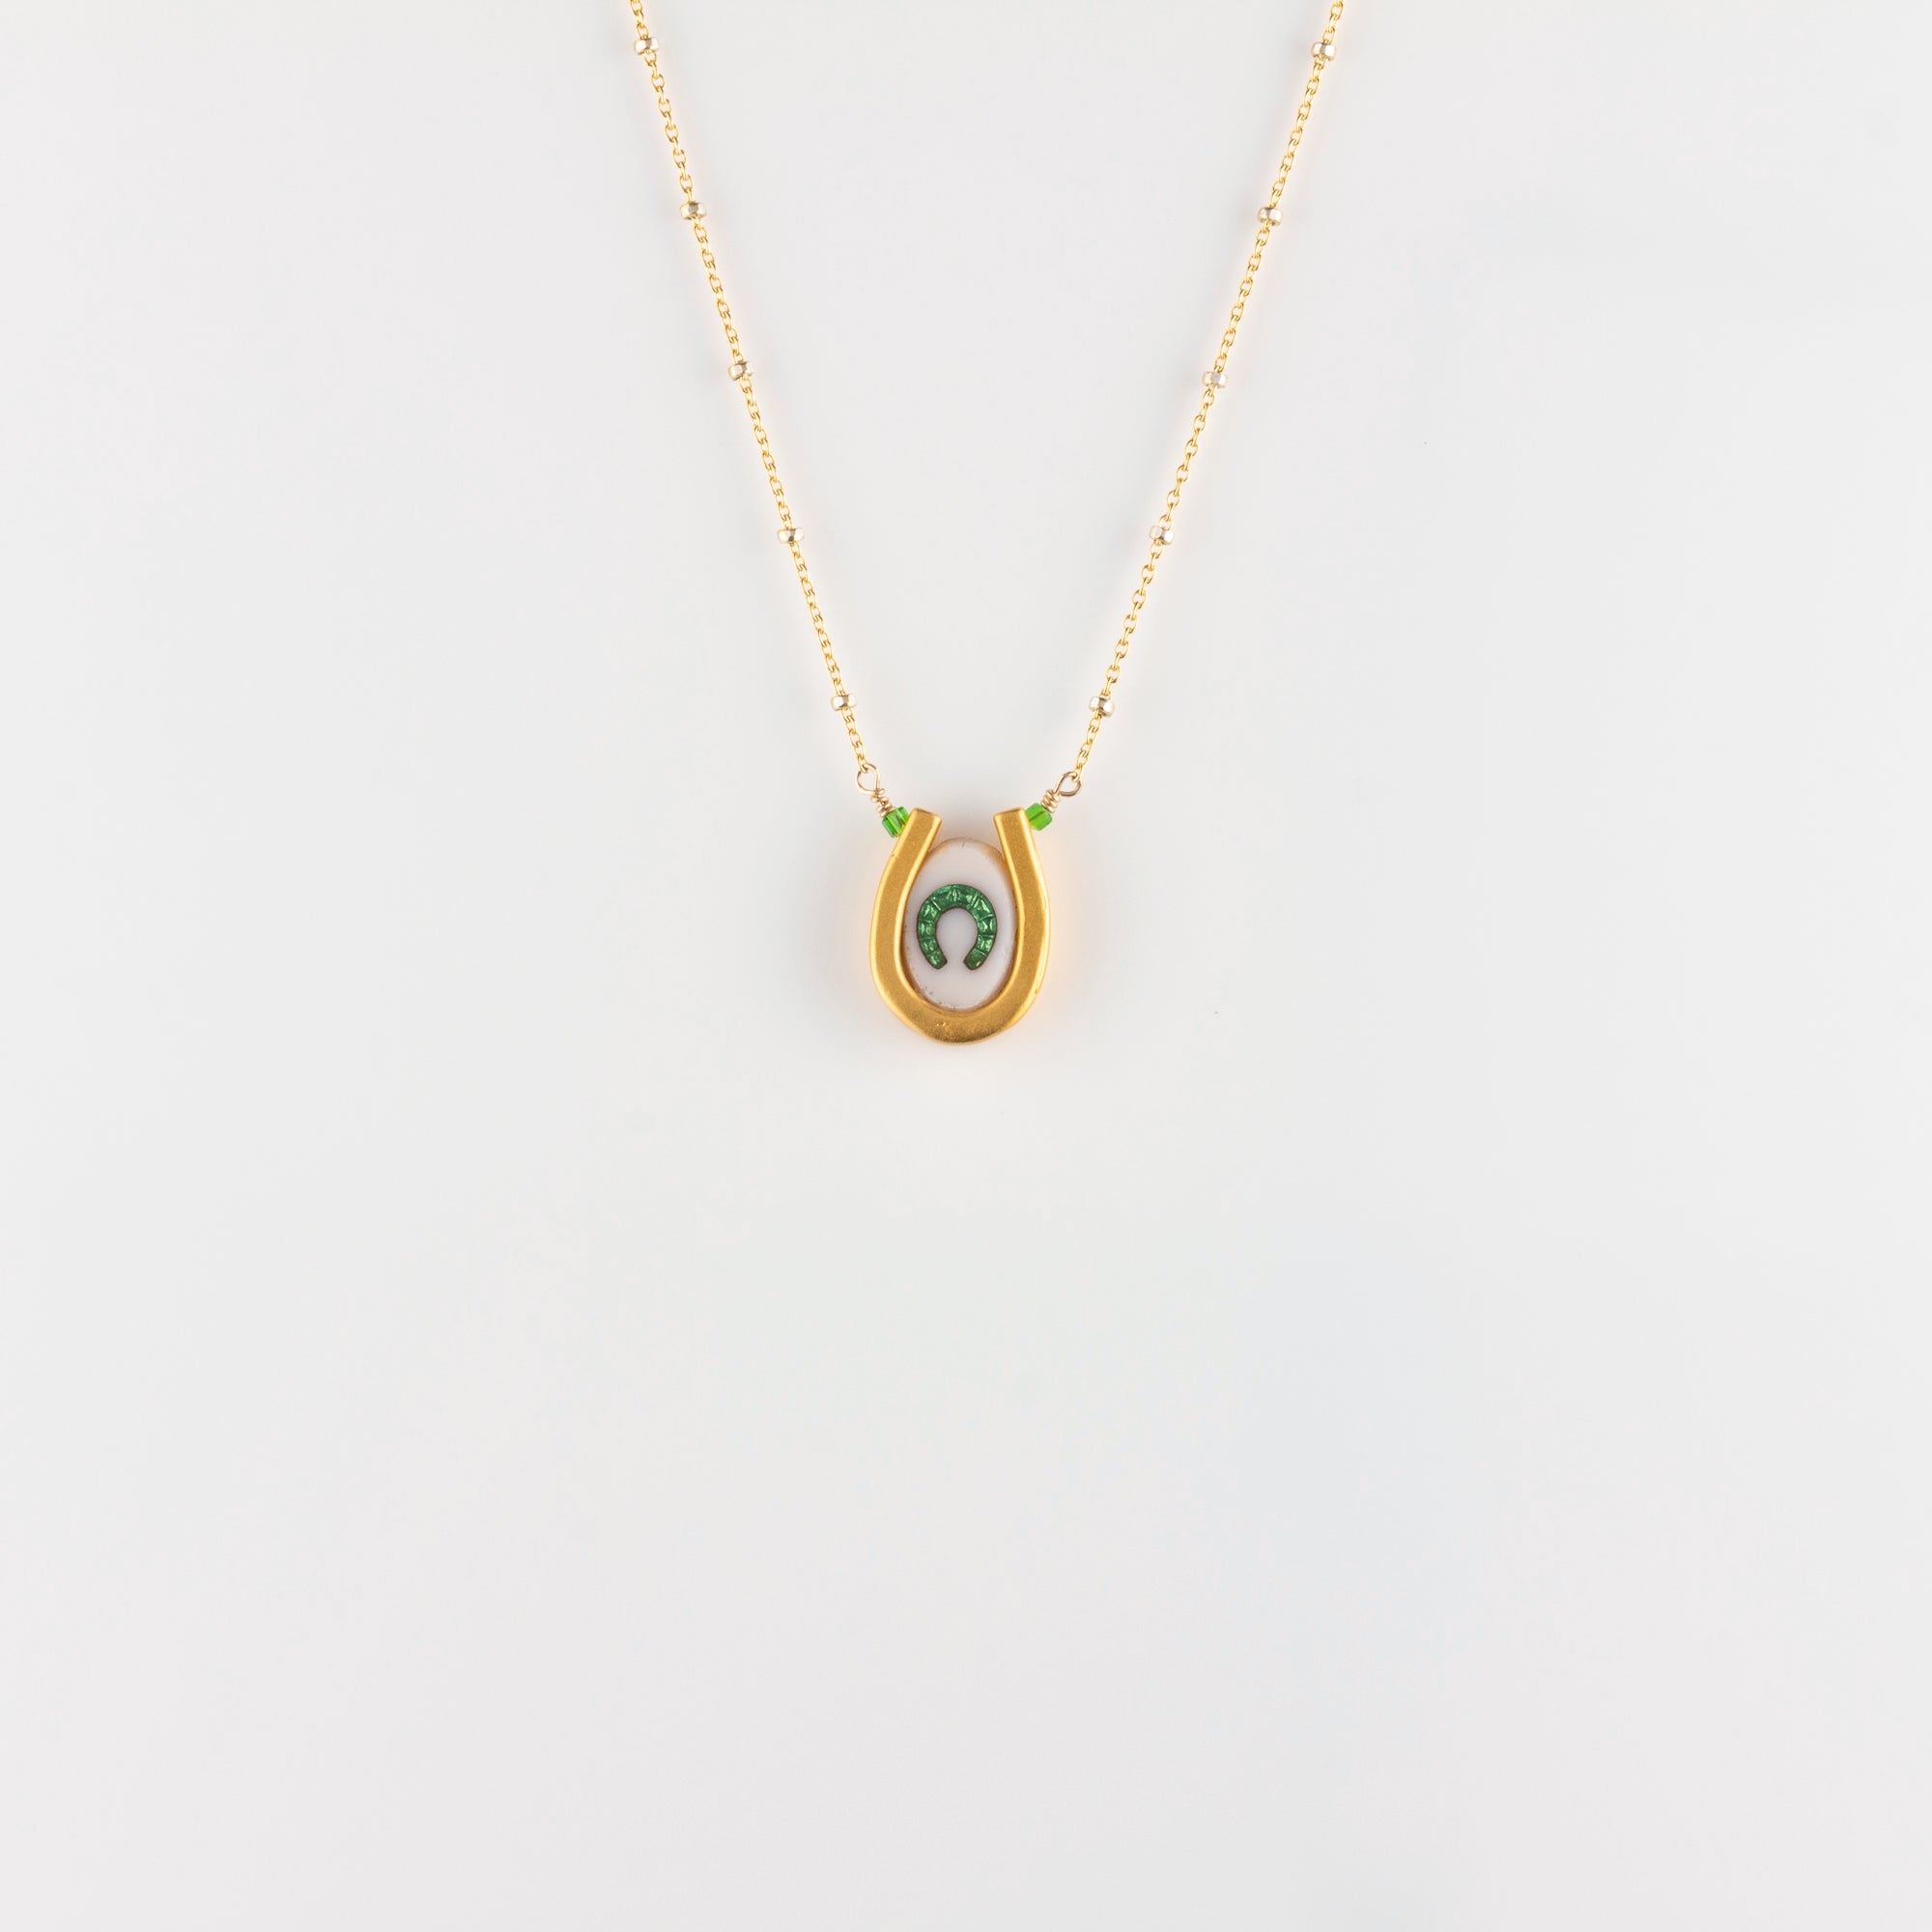 DOUBLE LUCK // VERMEIL NECKLACE // WHITE & GREEN